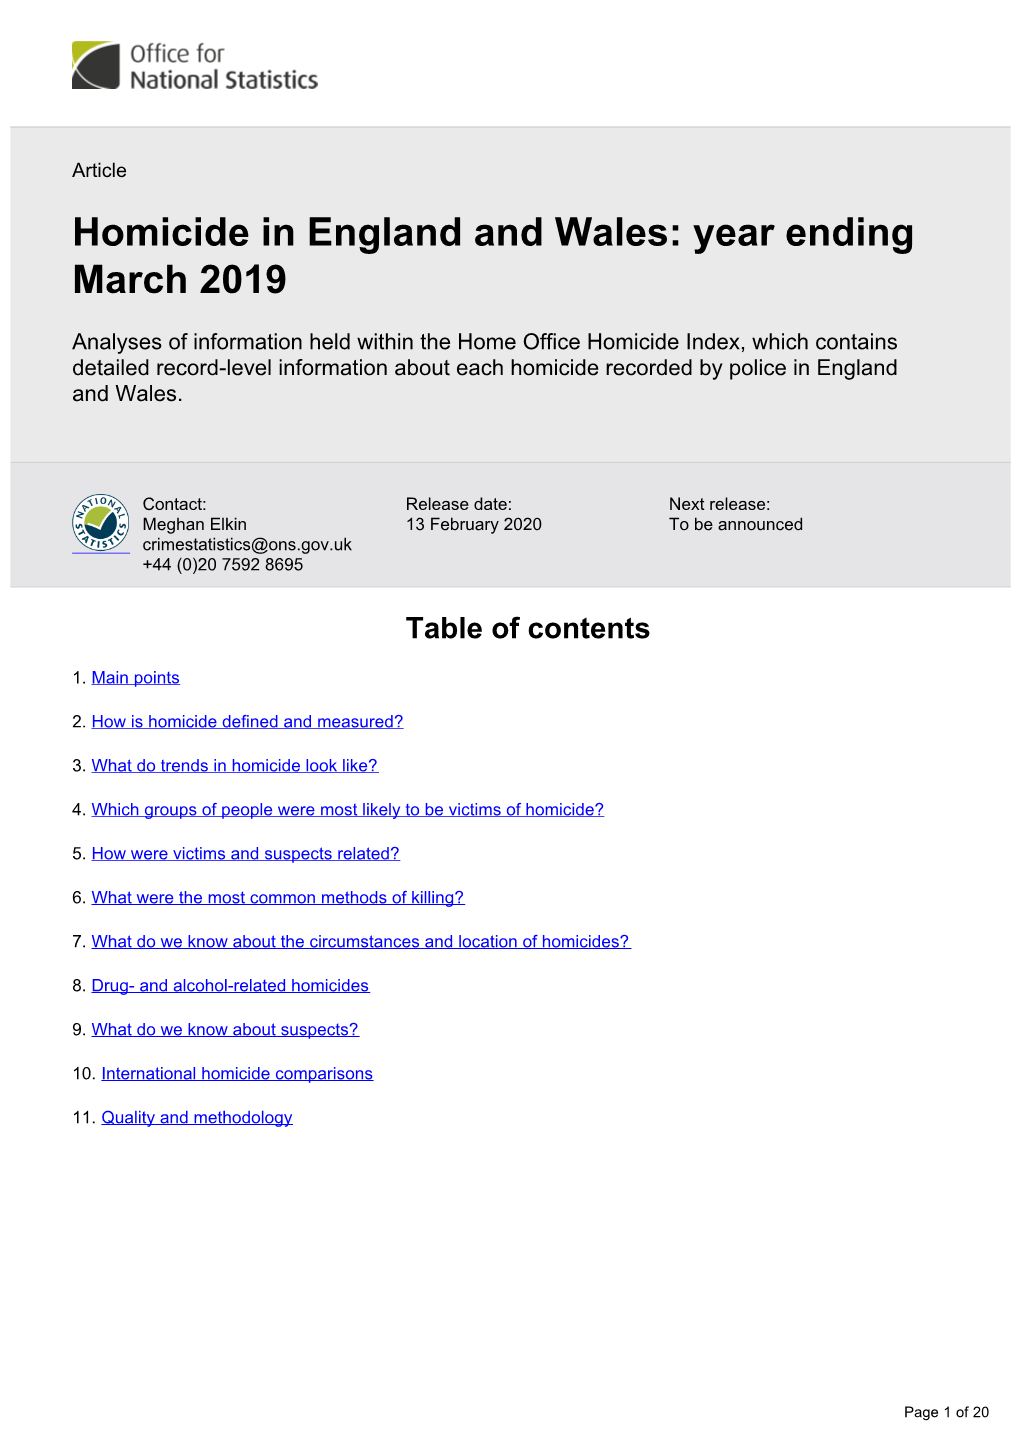 Homicide in England and Wales: Year Ending March 2019